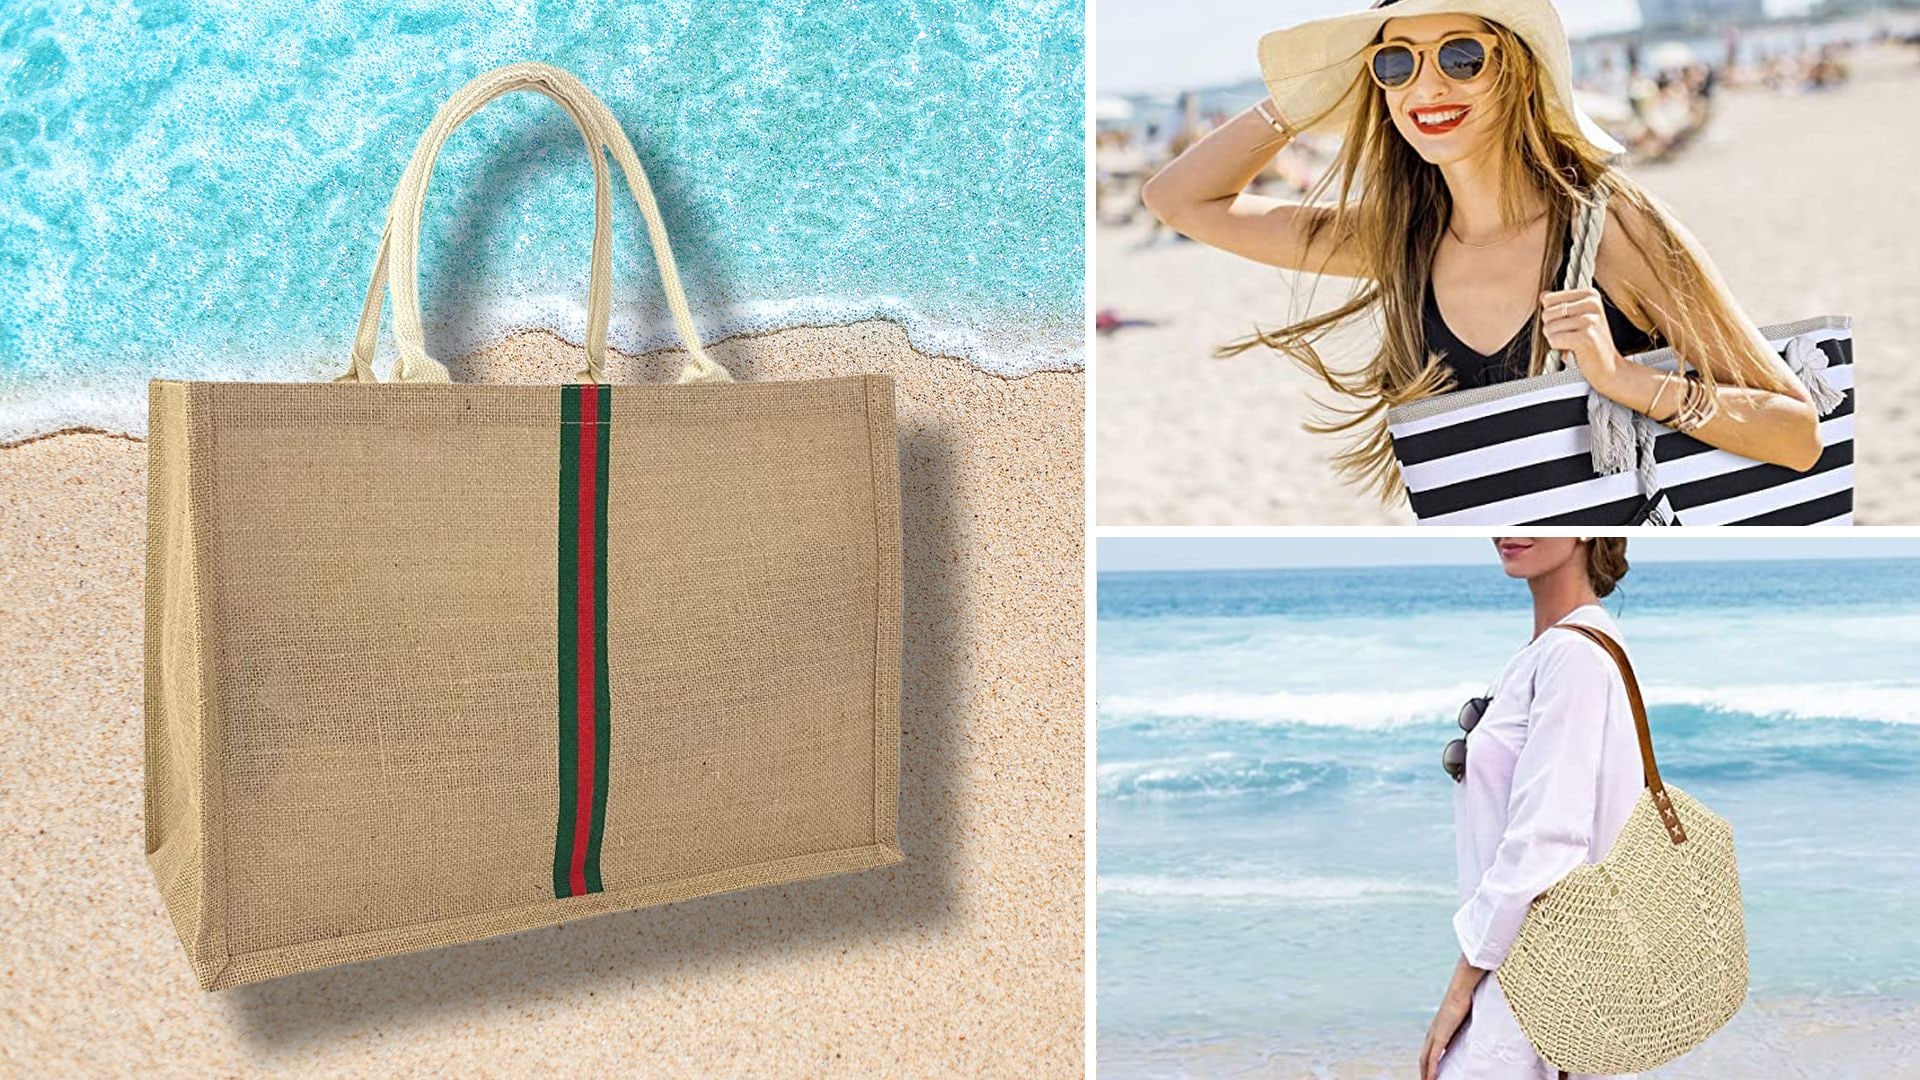 Must-Haves for a Day at the Beach // Bags, Books, Sunscreen and